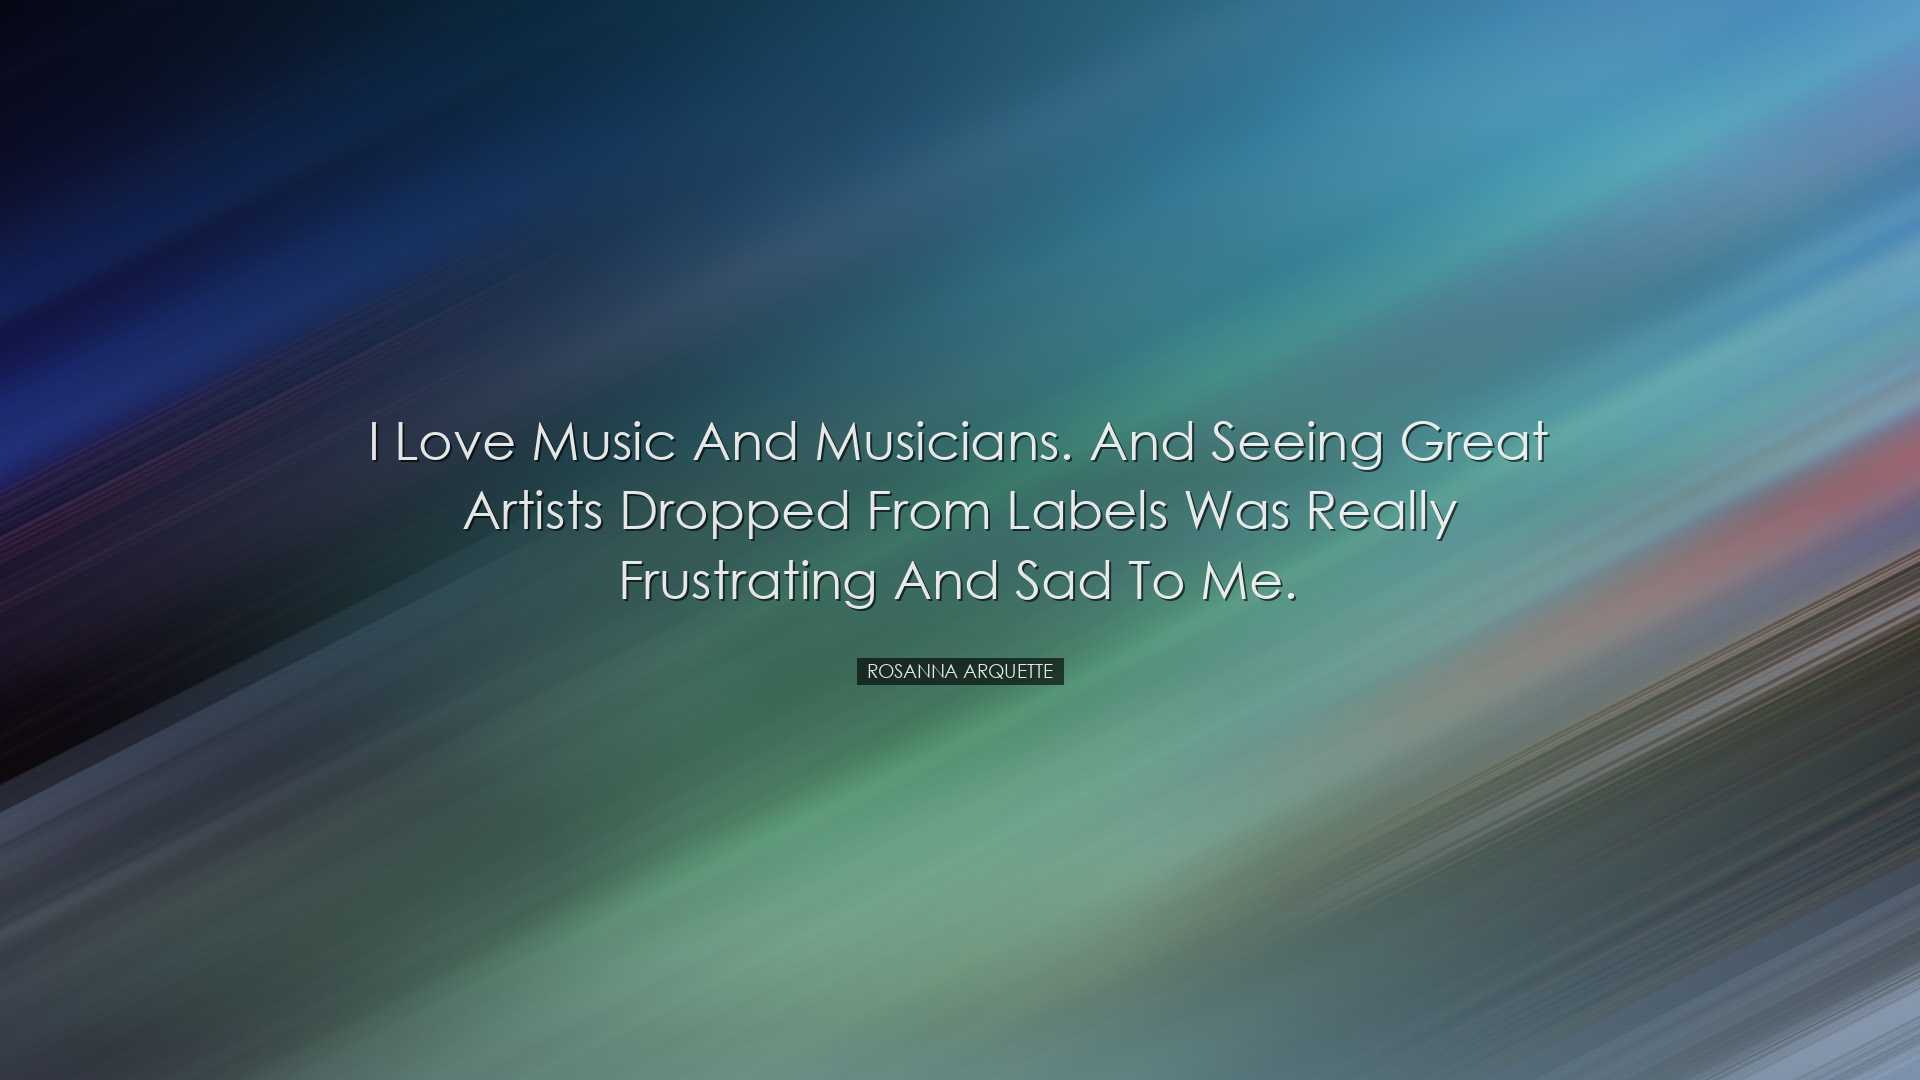 I love music and musicians. And seeing great artists dropped from